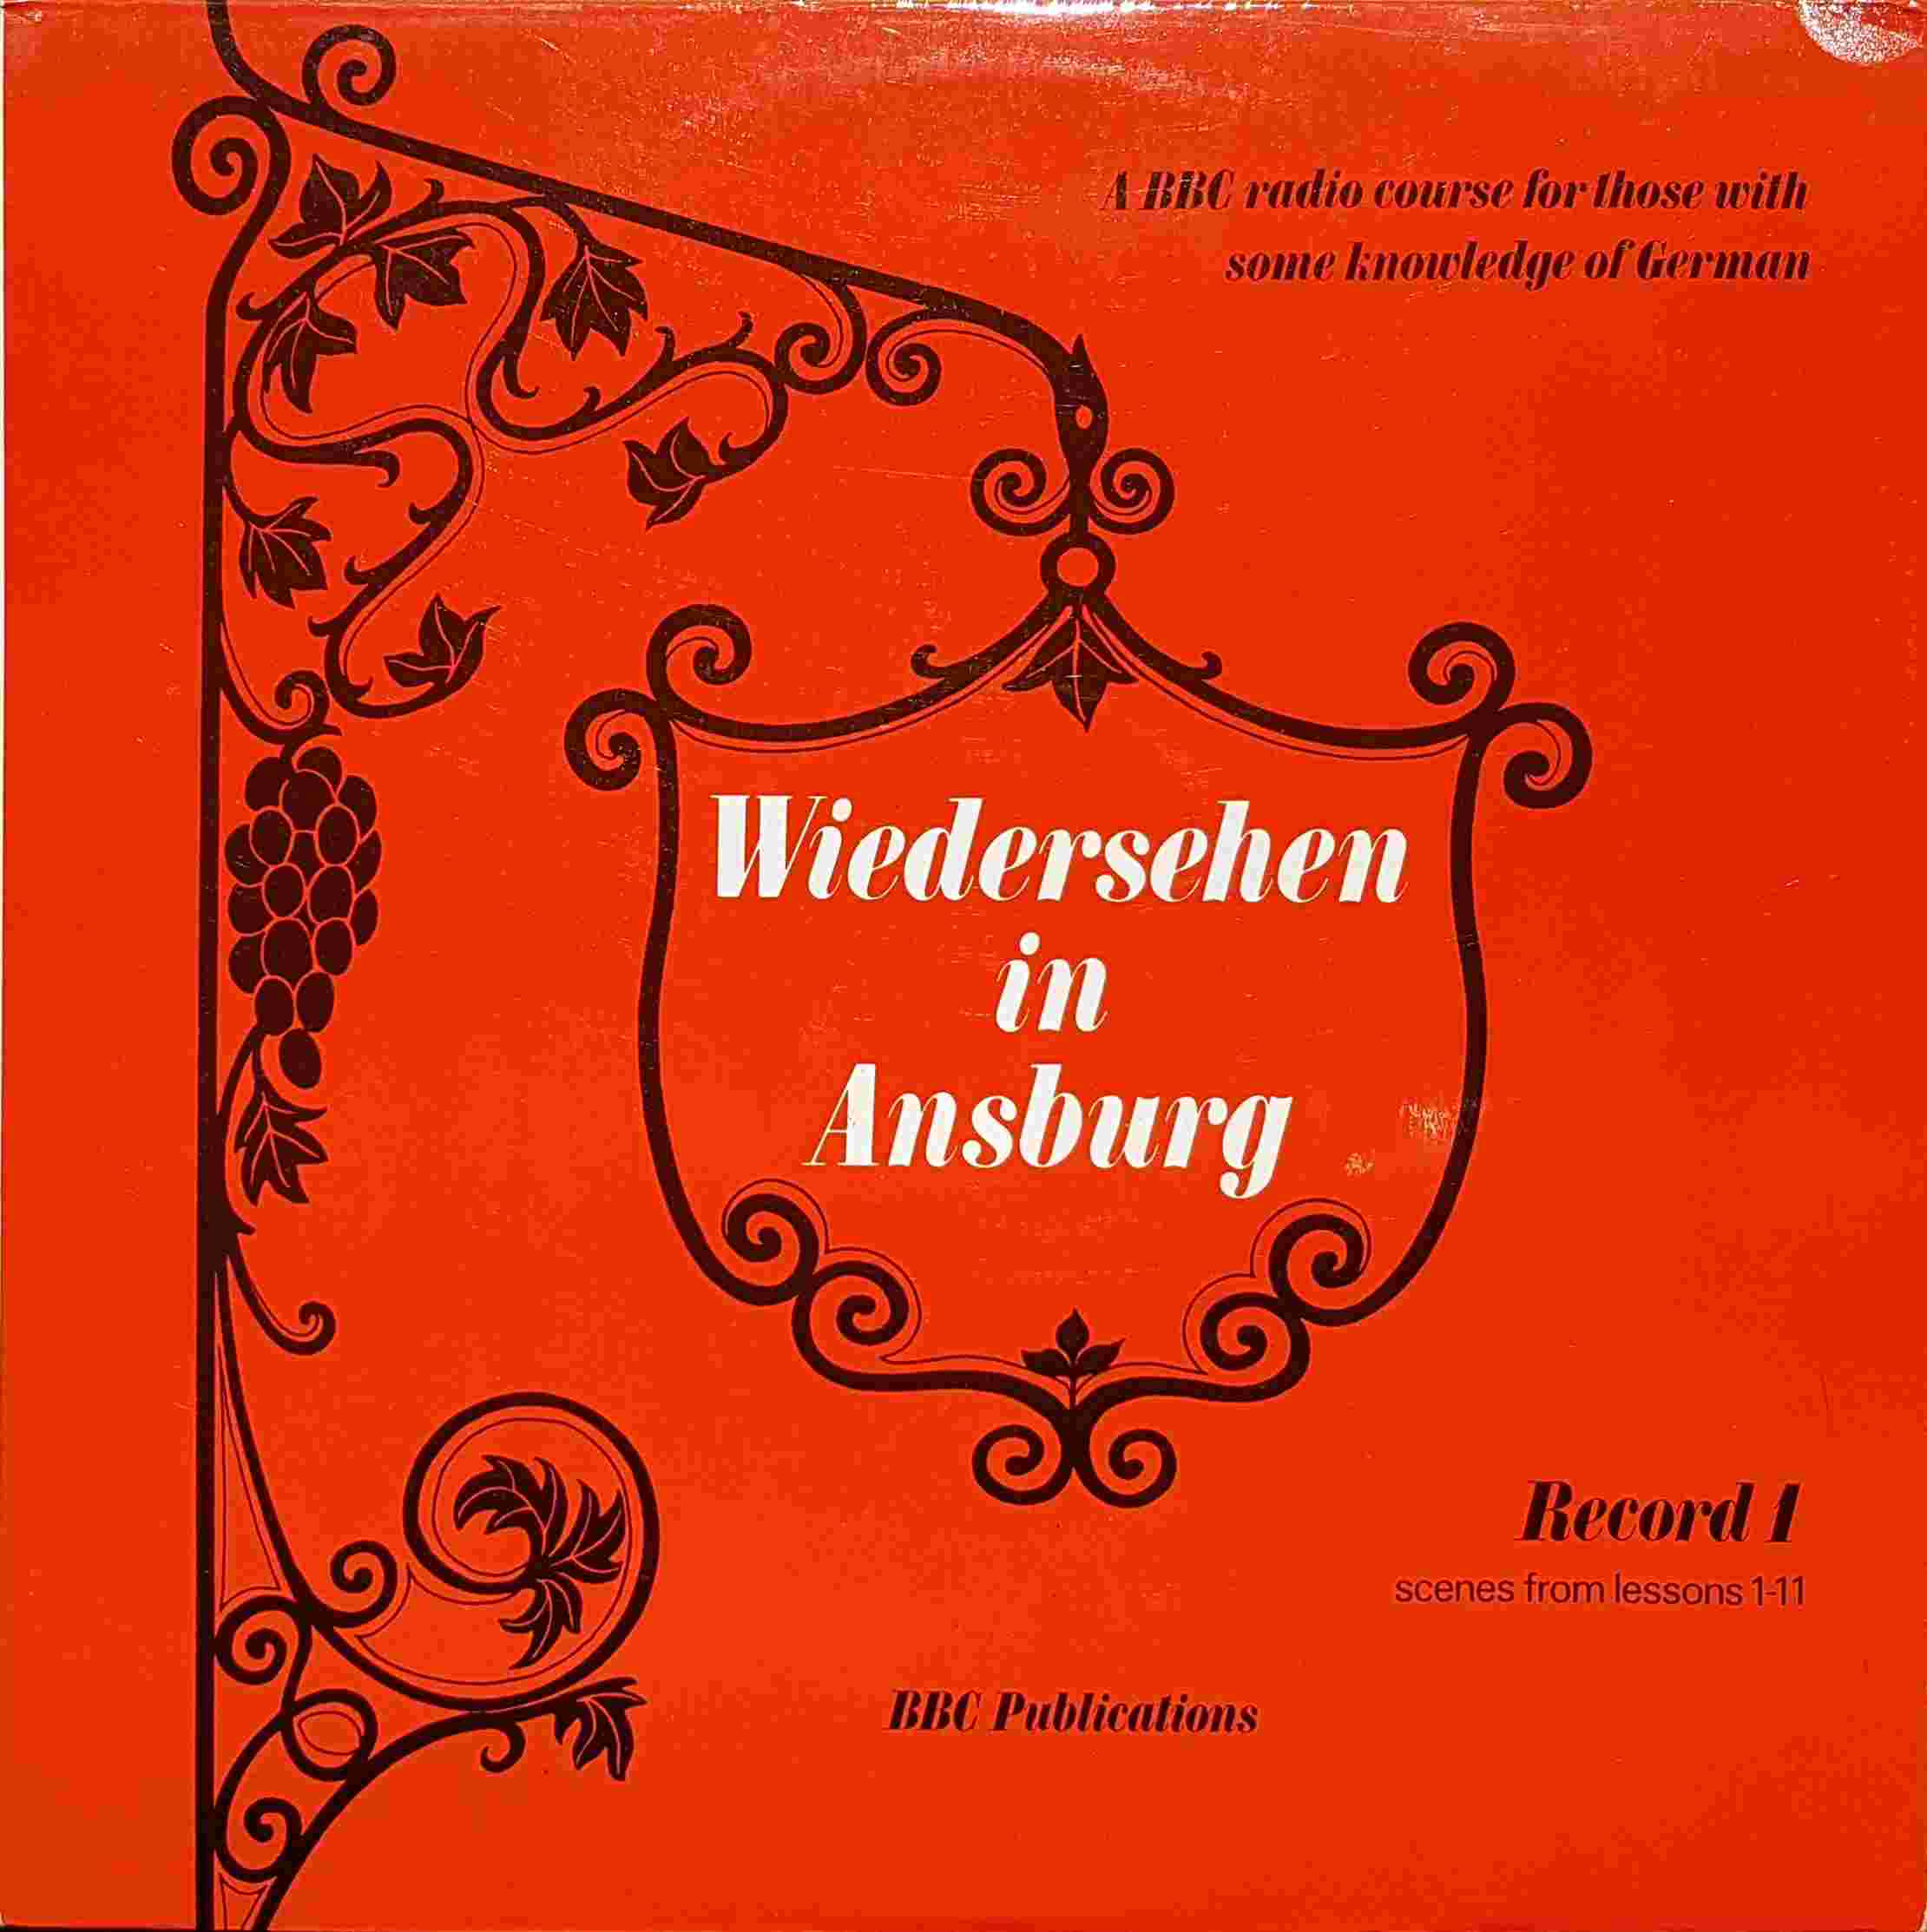 Picture of OP 153/154 Wiedersehen in Ansburg - A BBC radio course for those with some knowledge of German - Record 1 - Lessons 1 - 11 by artist Alexandra Marchl-von-Herwarth / Edith R. Baer from the BBC albums - Records and Tapes library